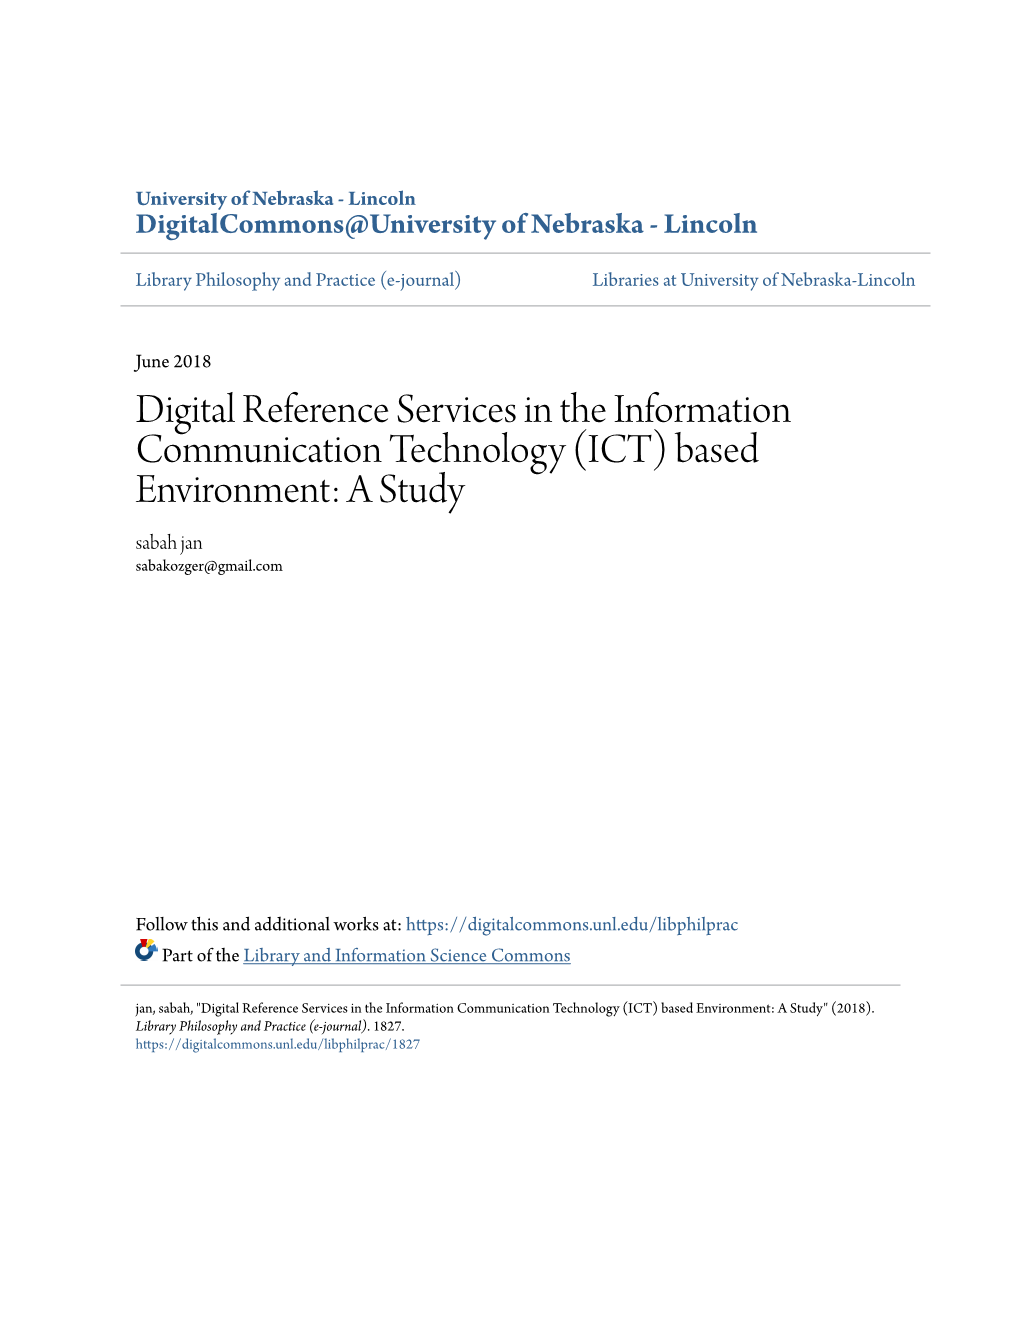 Digital Reference Services in the Information Communication Technology (ICT) Based Environment: a Study Sabah Jan Sabakozger@Gmail.Com